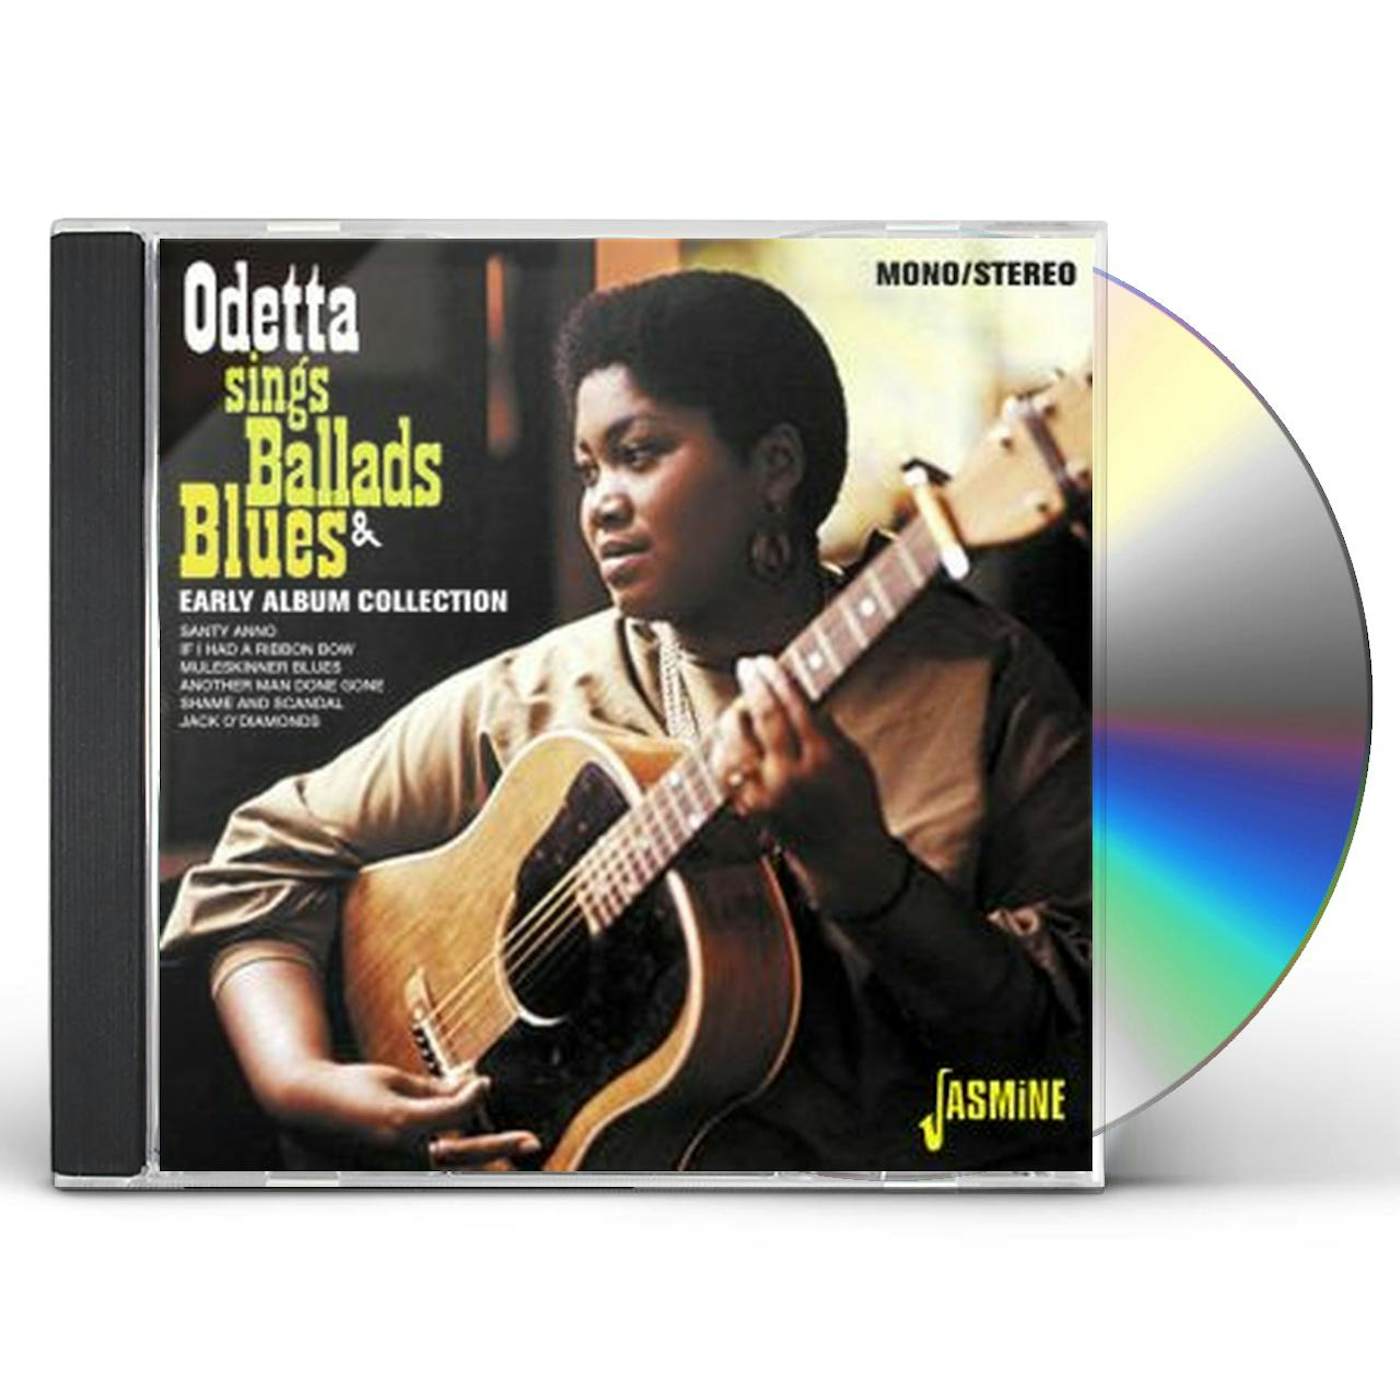 Odetta SINGS BALLADS & BLUES: EARLY ALBUM COLLECTION CD